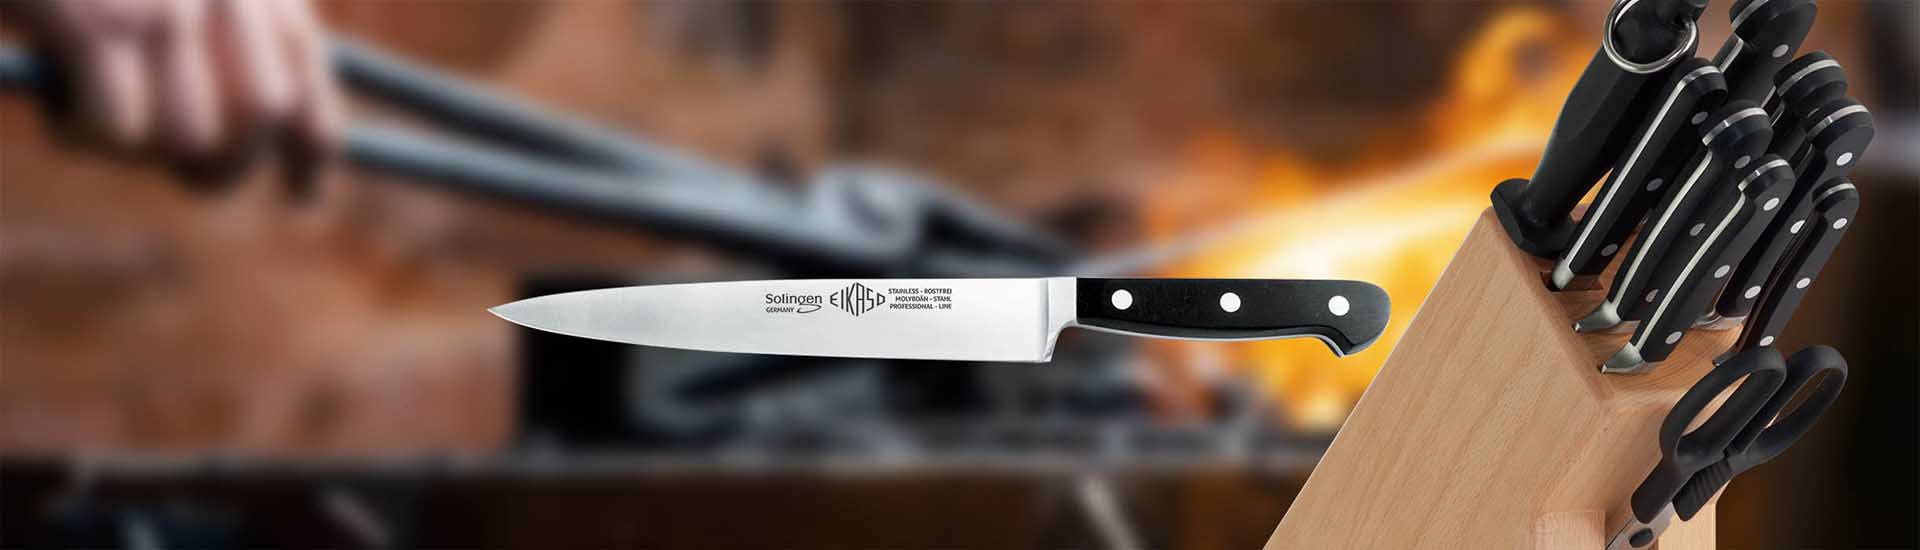 Eikaso - Traditional Craftsmanship from Solingen: The Perfect Chef's Knife for Discerning Cooks.